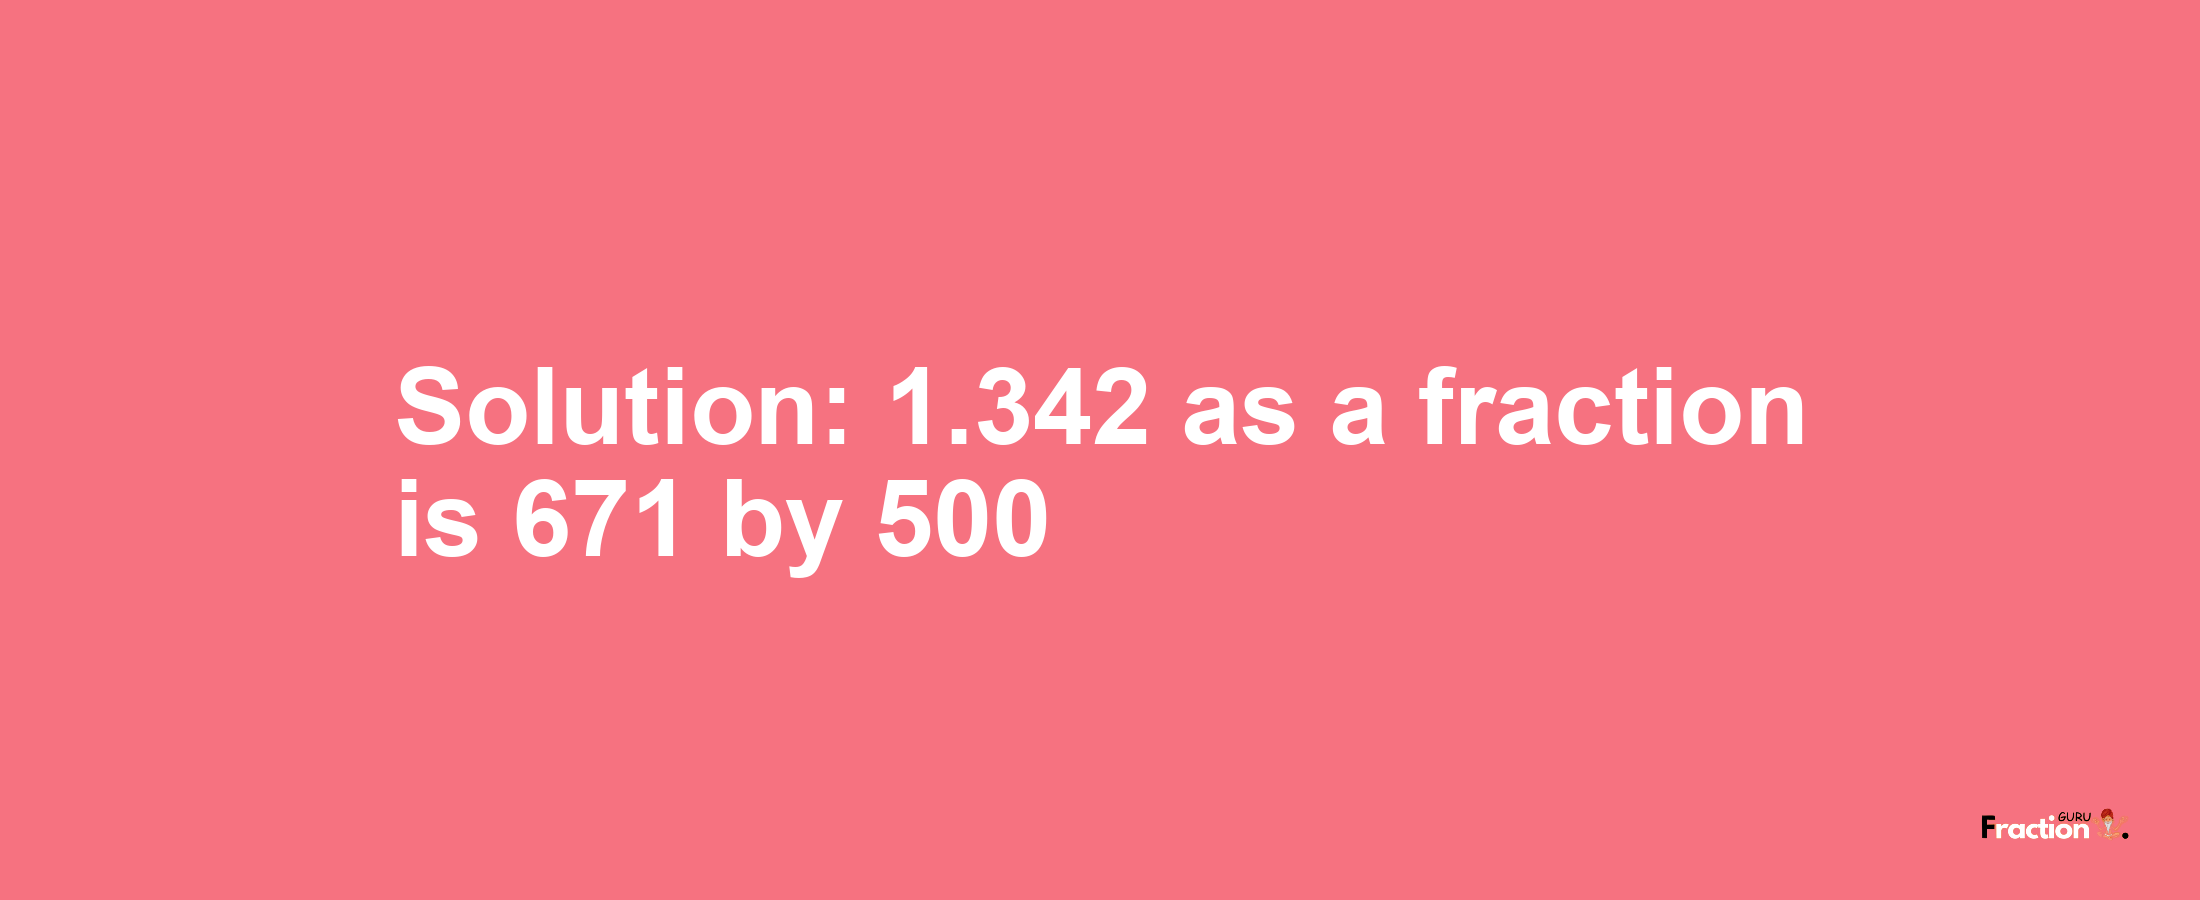 Solution:1.342 as a fraction is 671/500